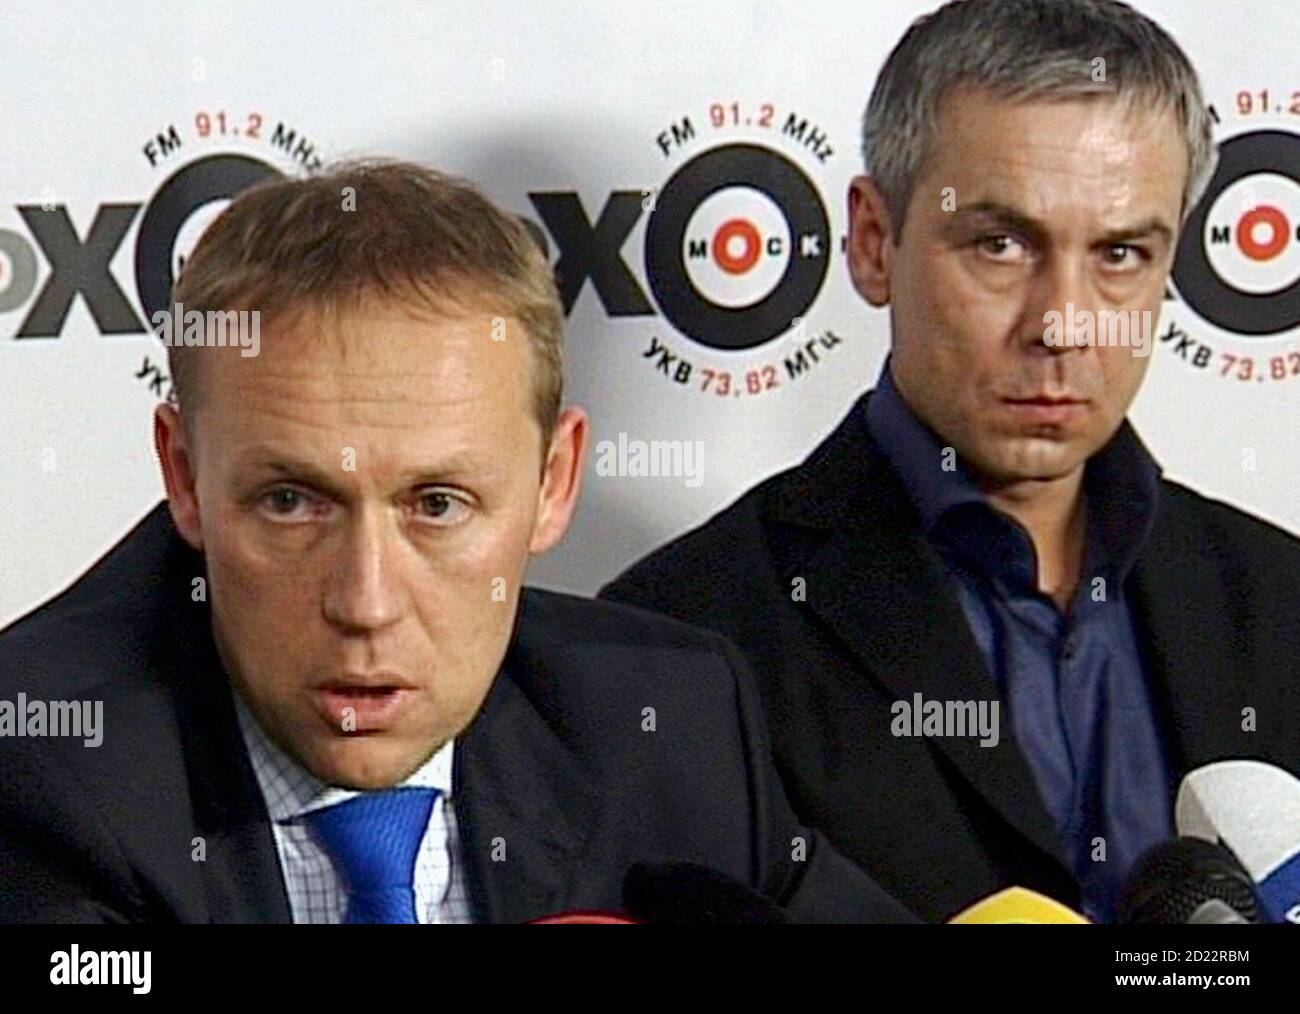 Russian businessman Andrei Lugovoy (L) and his business partner Dmitry  Kovtun speak during an interview on Ekho Moskvy radio in Moscow November  24, 2006. Lugovoy, who met met ex-KGB spy Alexander Litvinenko